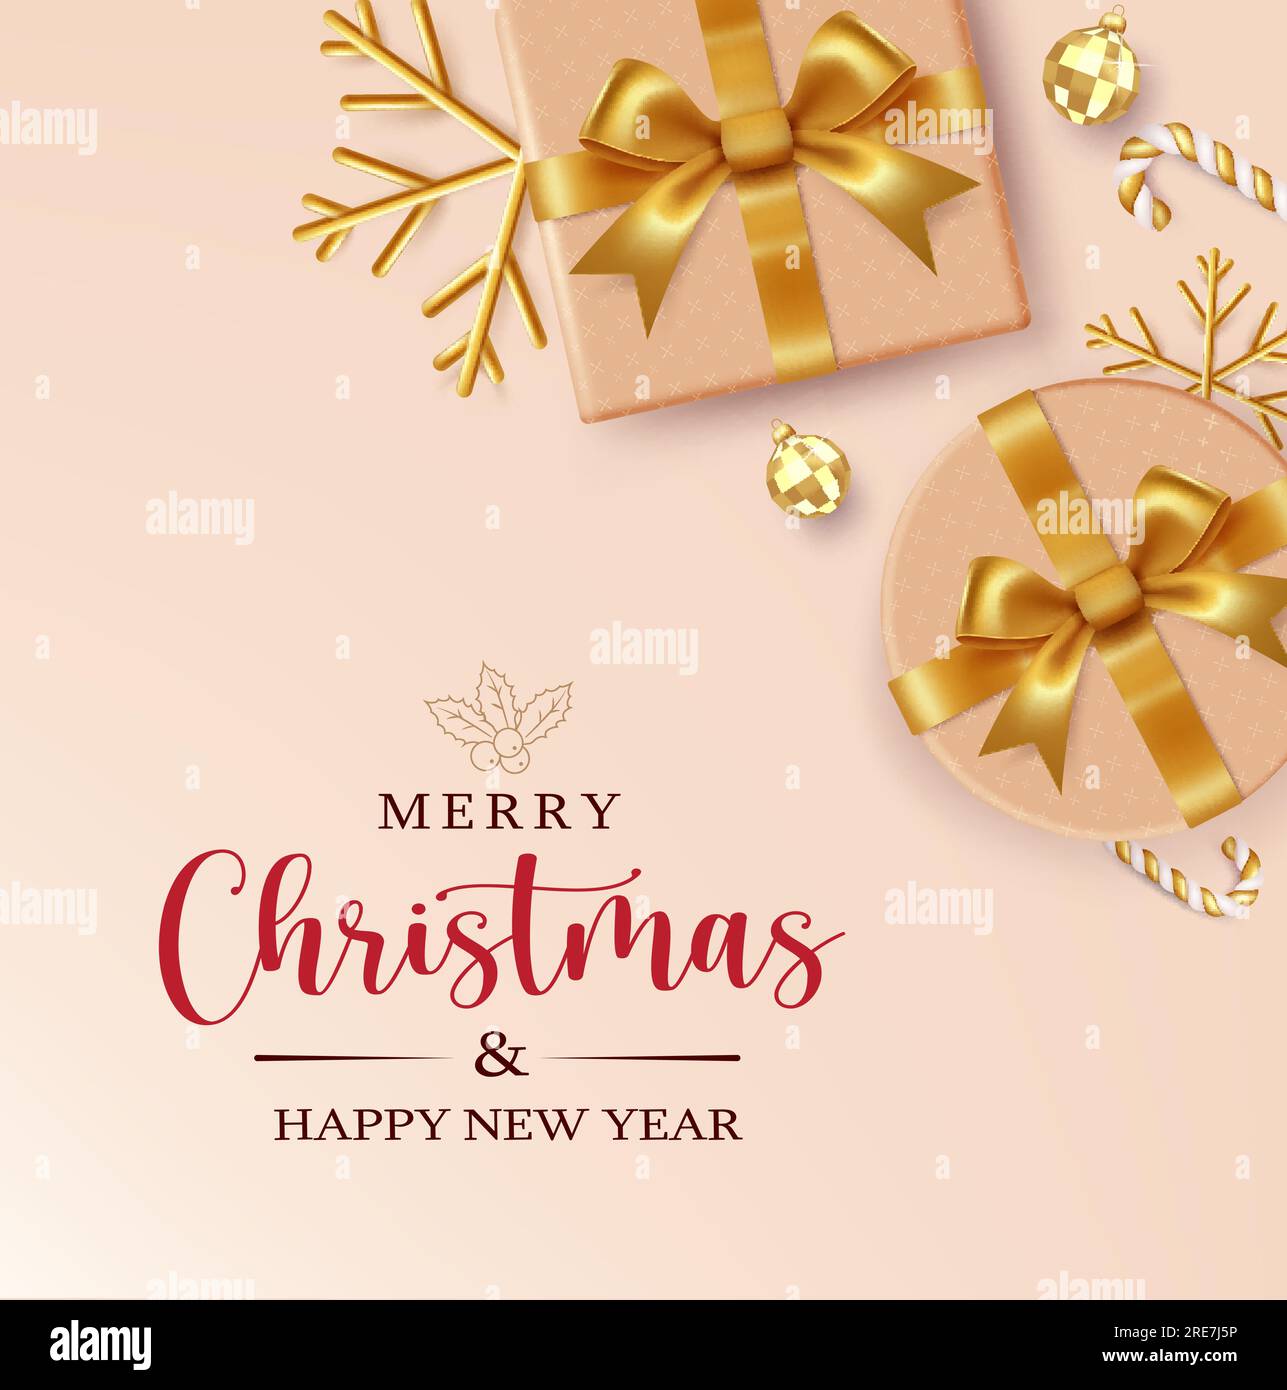 Merry christmas text vector design. Christmas and new year greeting with elegant gift surprise decoration elements. Vector illustration holiday season Stock Vector